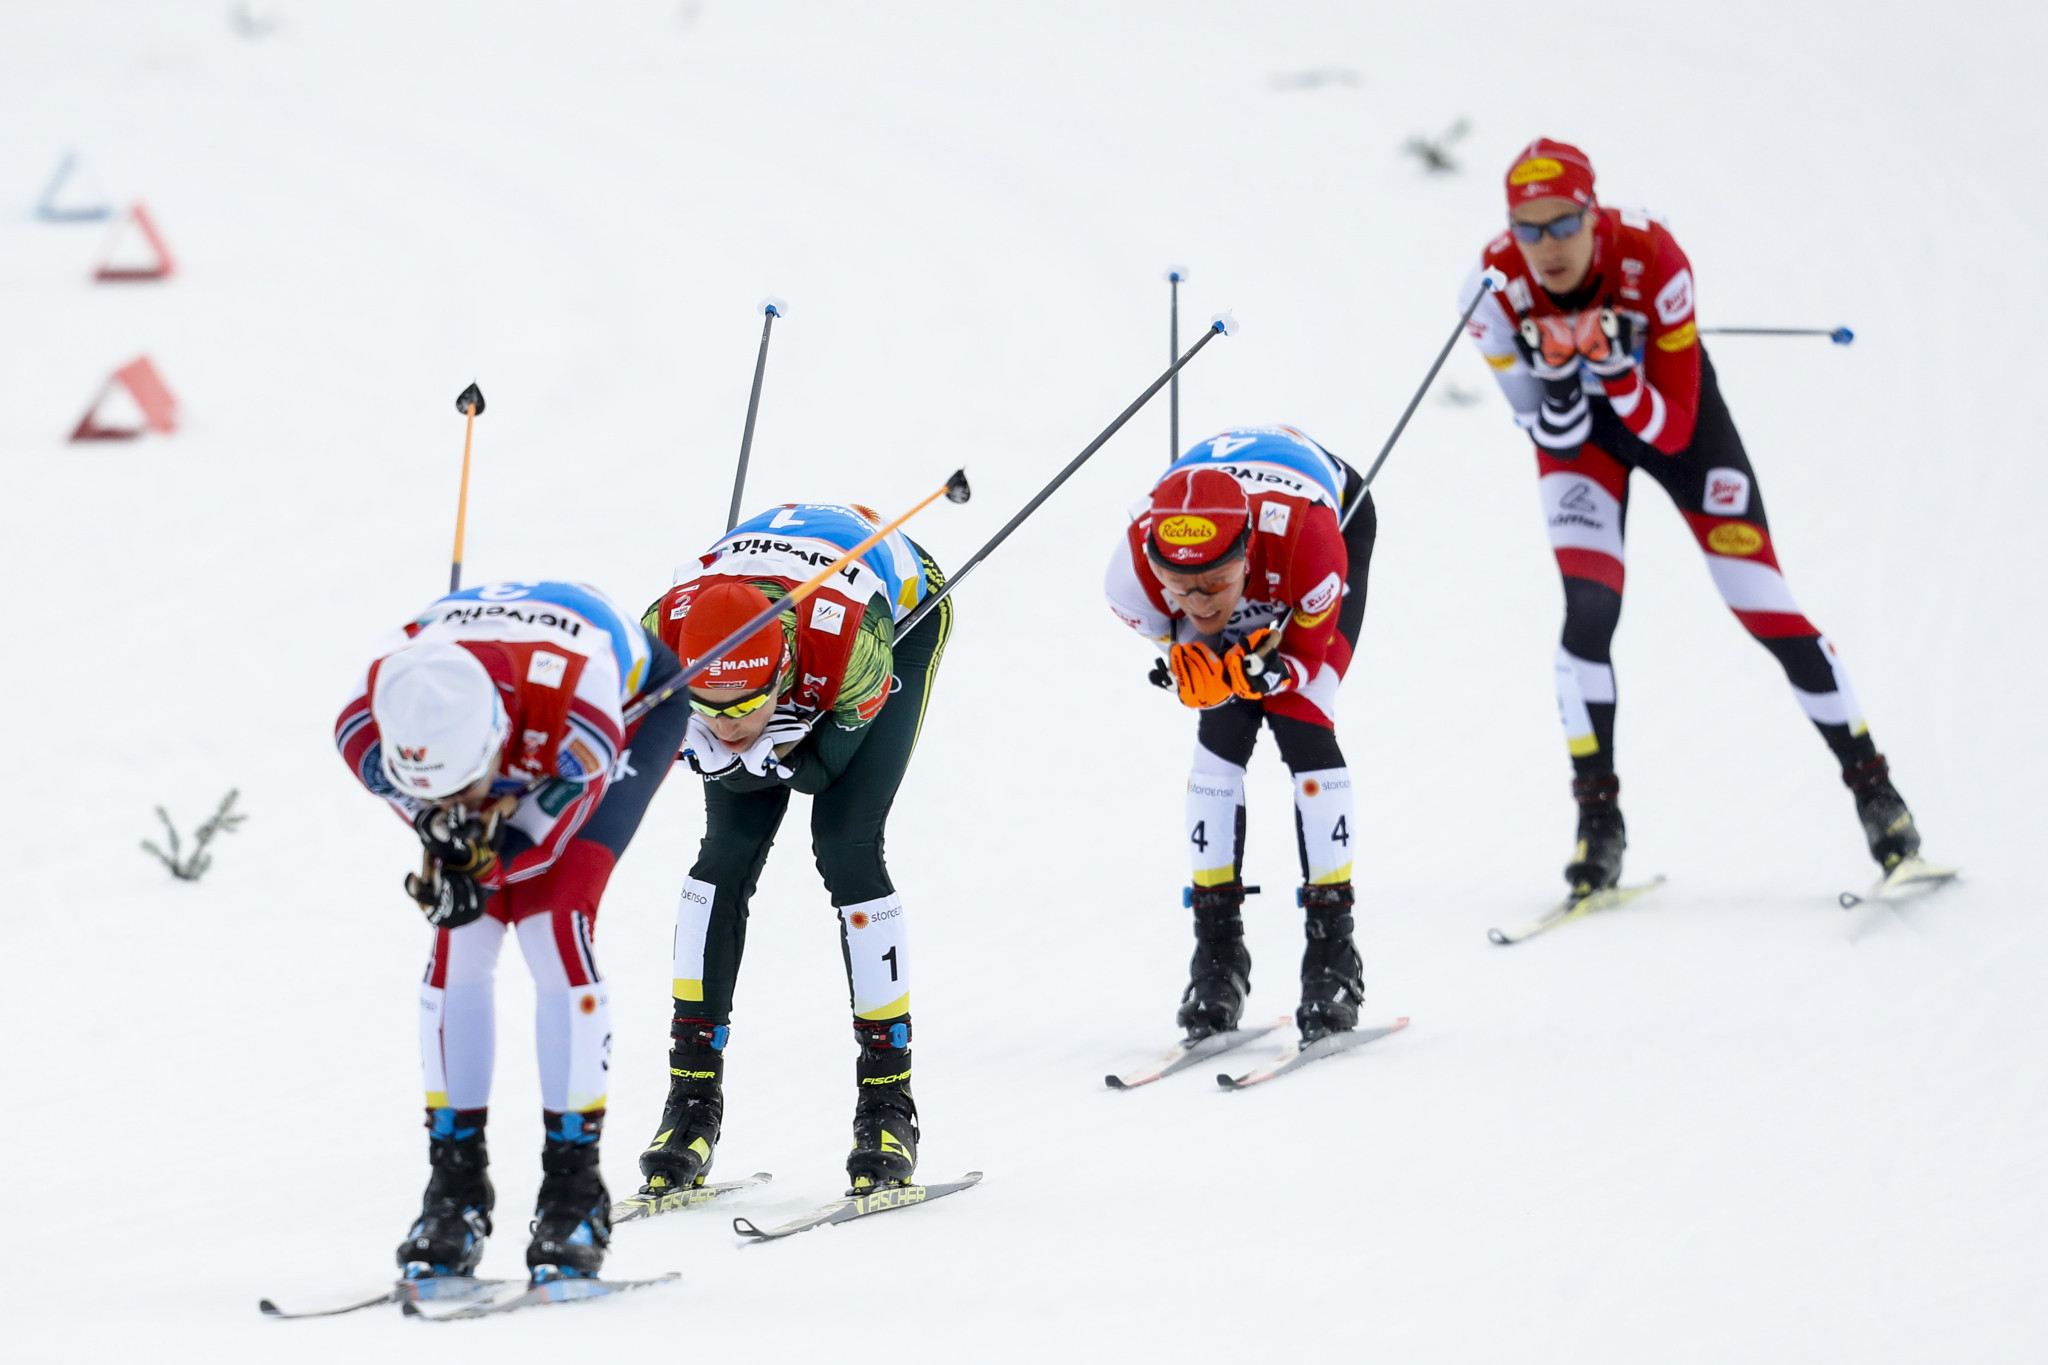 Frenzel's time in the final race was enough to give him his sixth Nordic combined world title ©Getty Images